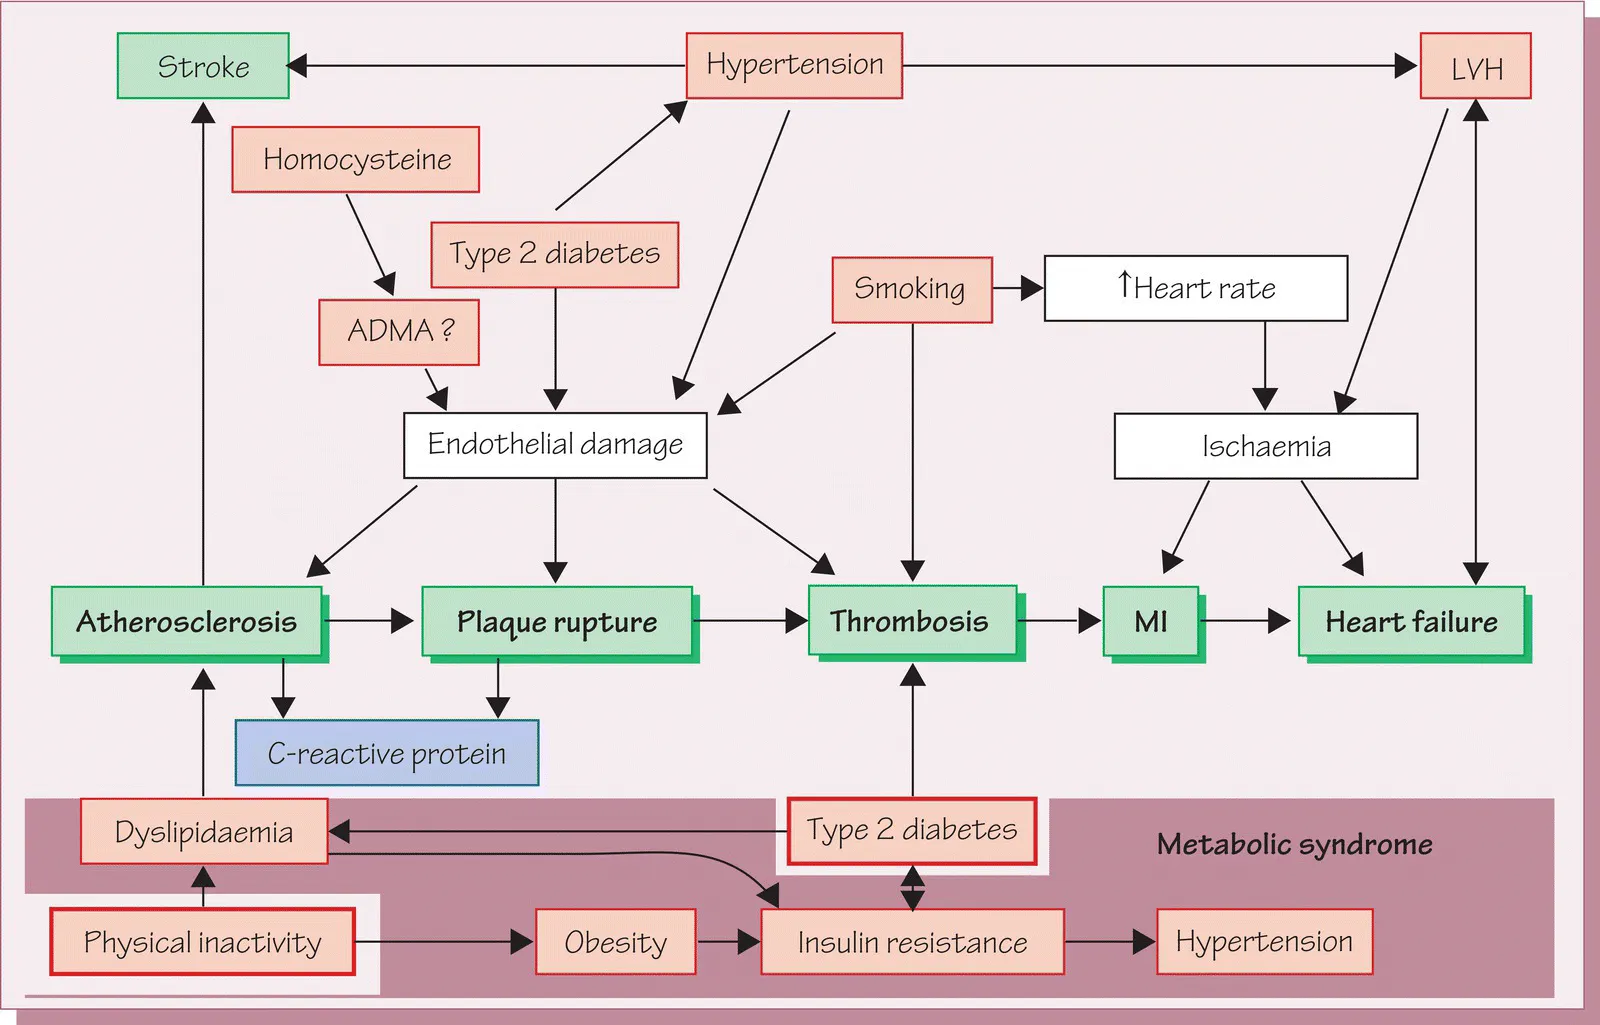 An illustration of the relationships between risk factors and cardiovascular disease.